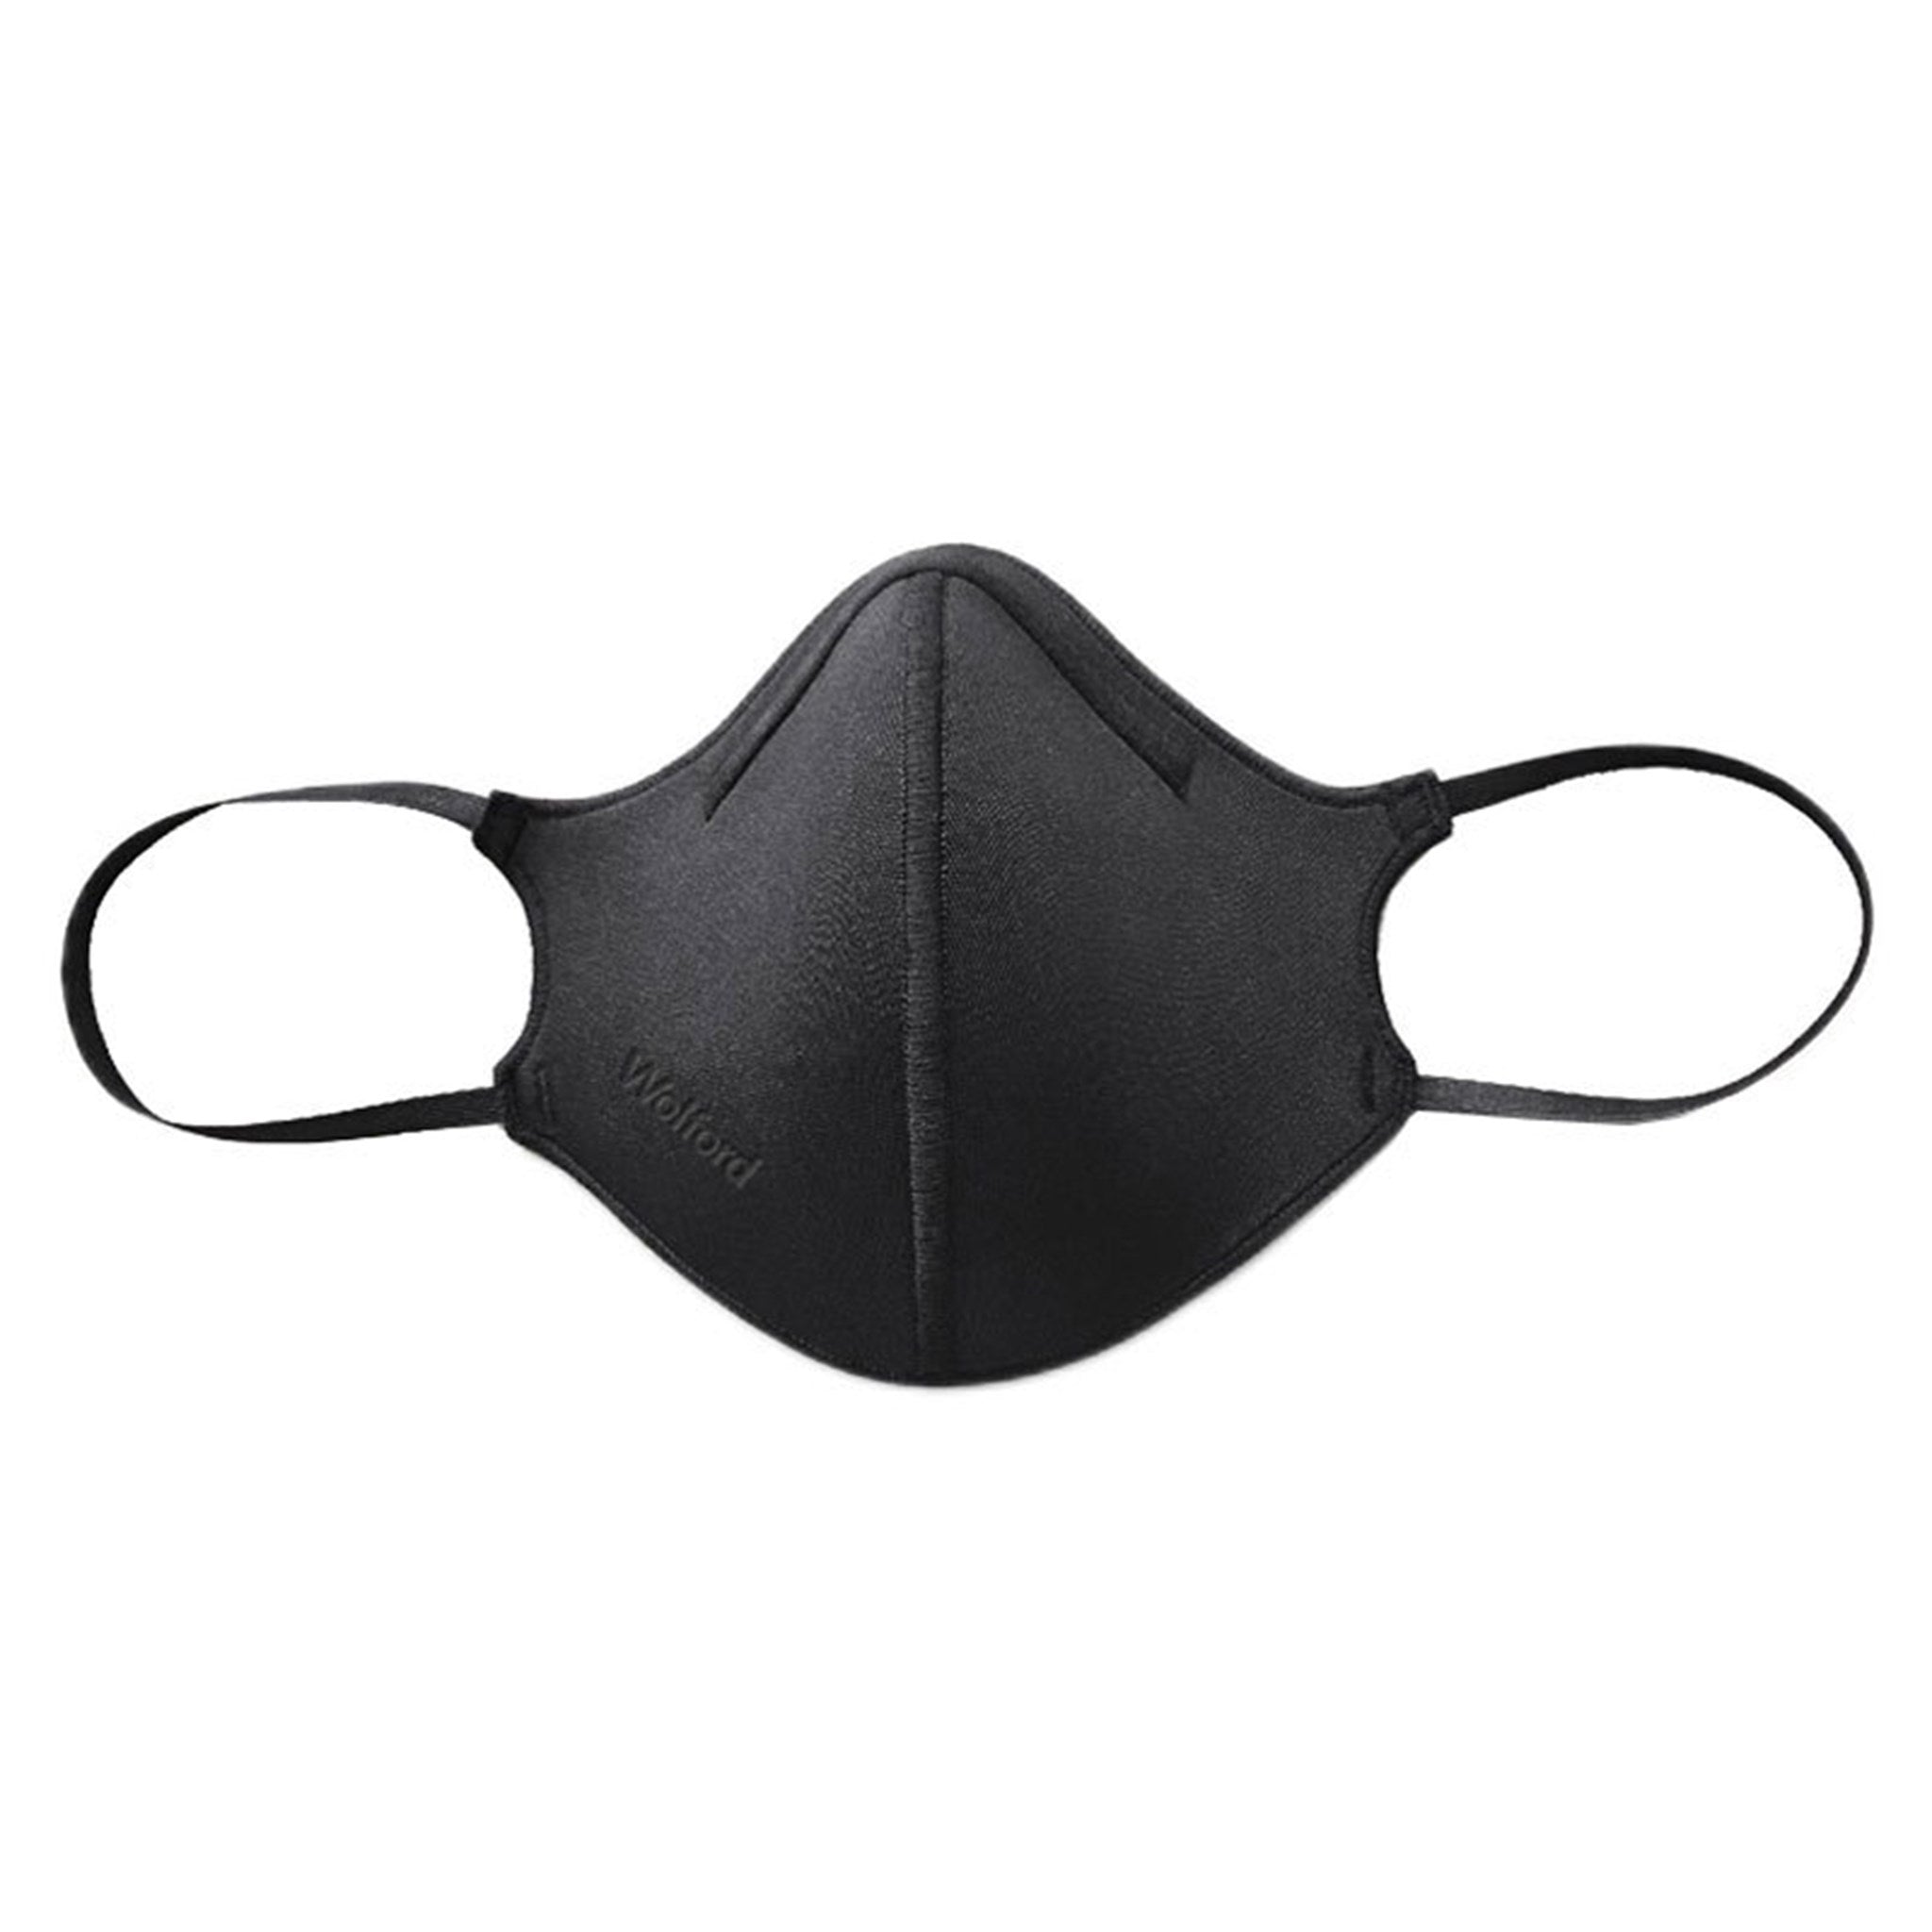 Billede af Wolford Care Mask, stofmundbind, xtra small-small (XS-S), Sort